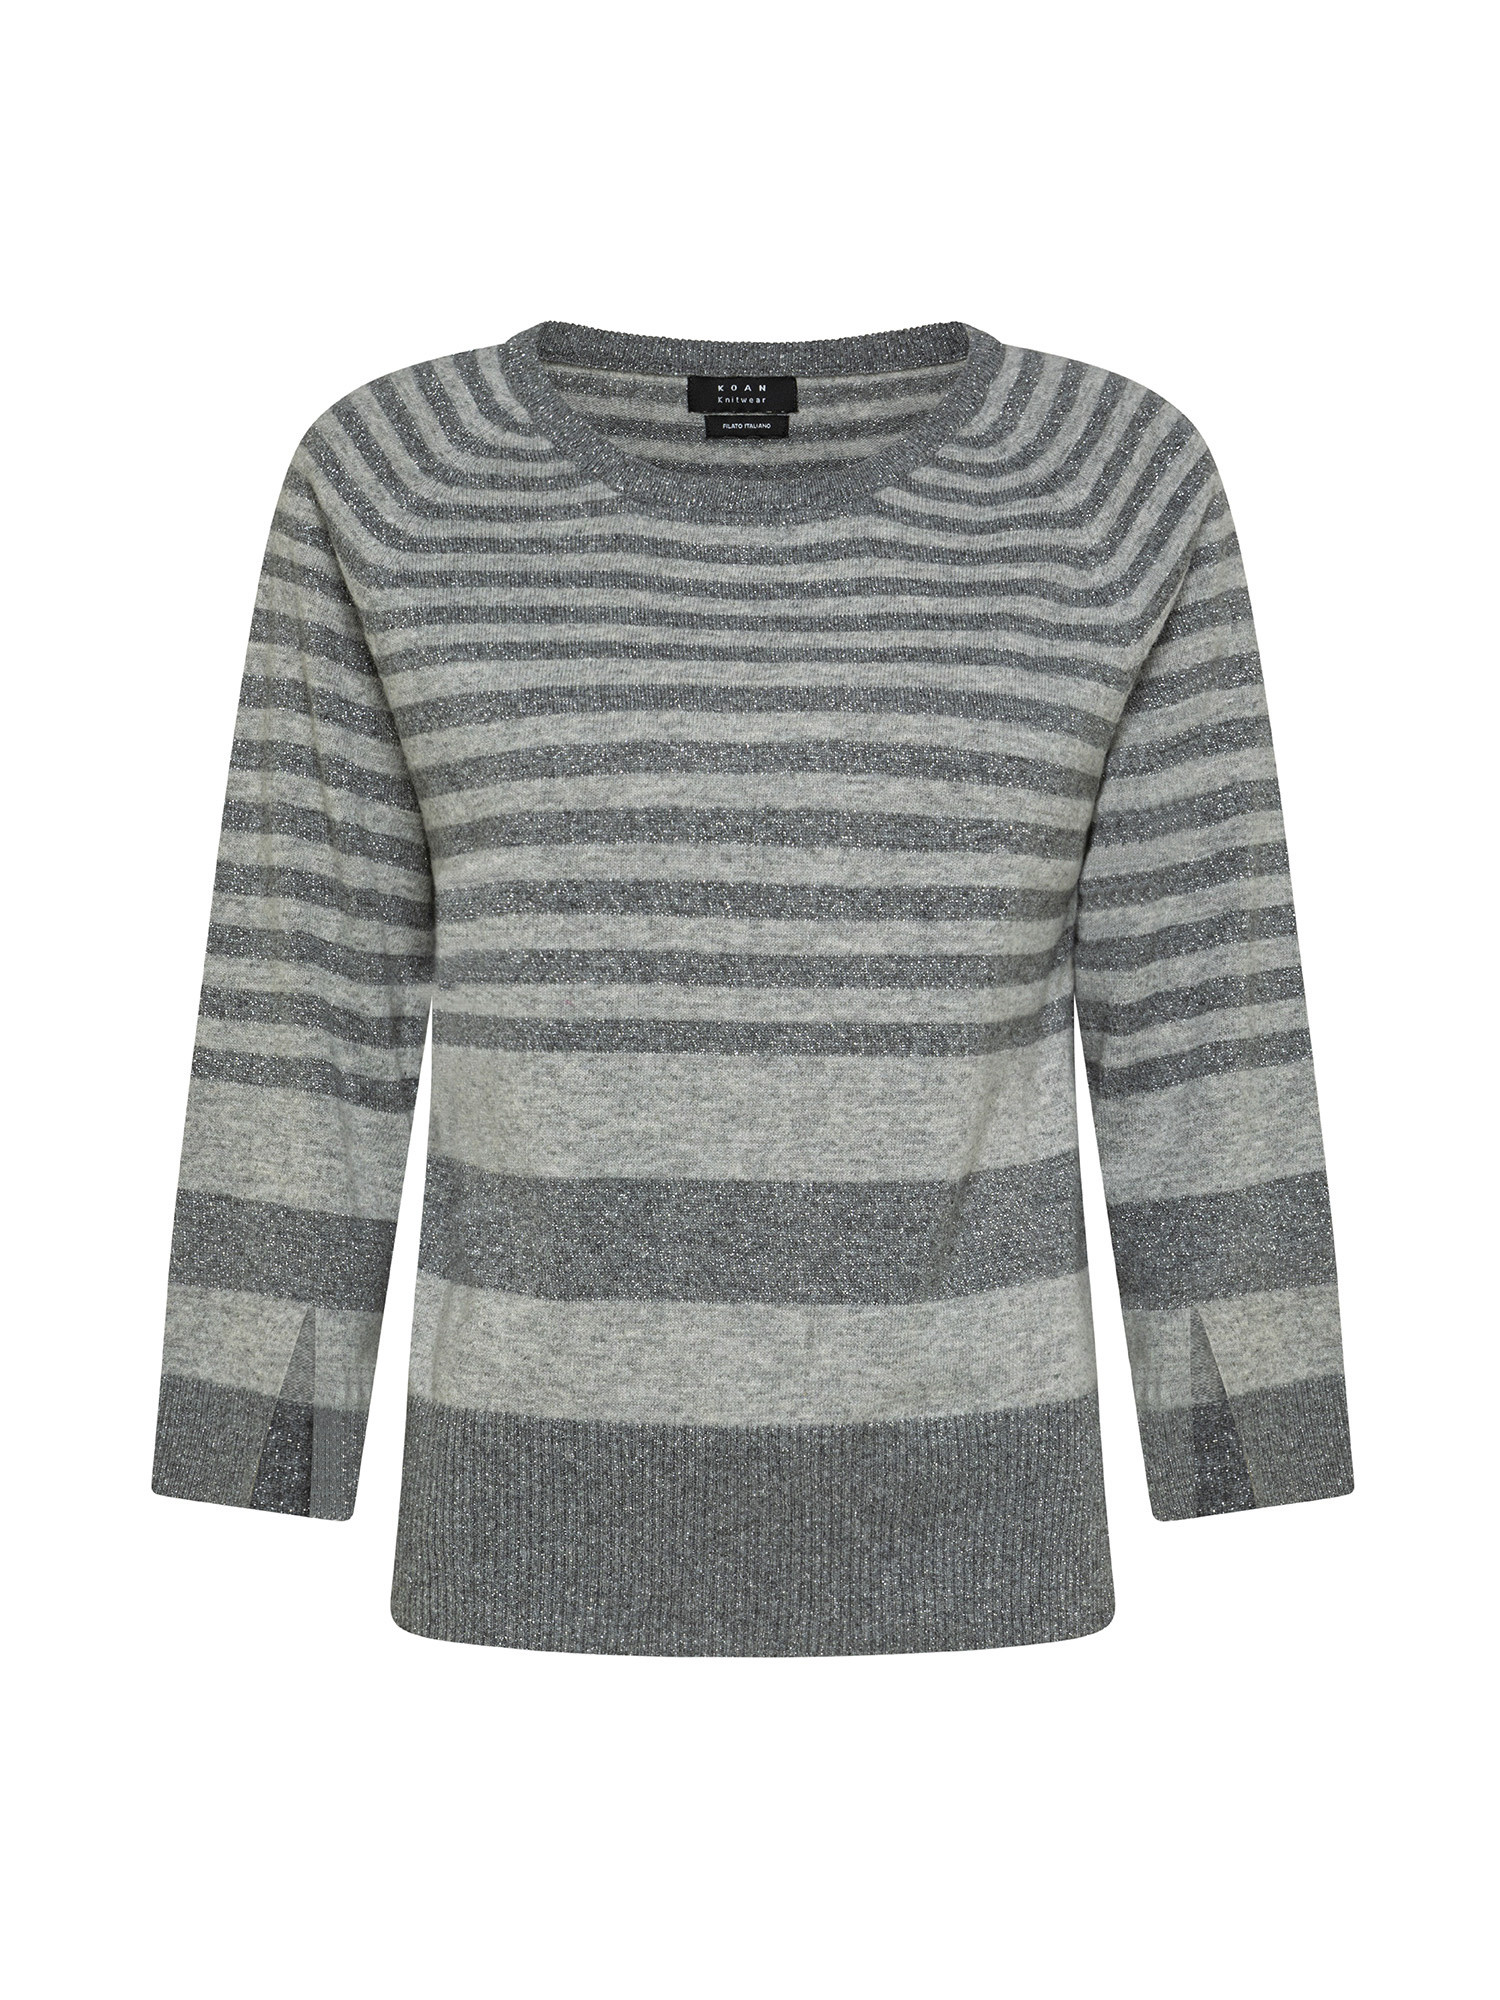 Koan - Striped sweater with slits, Grey, large image number 0